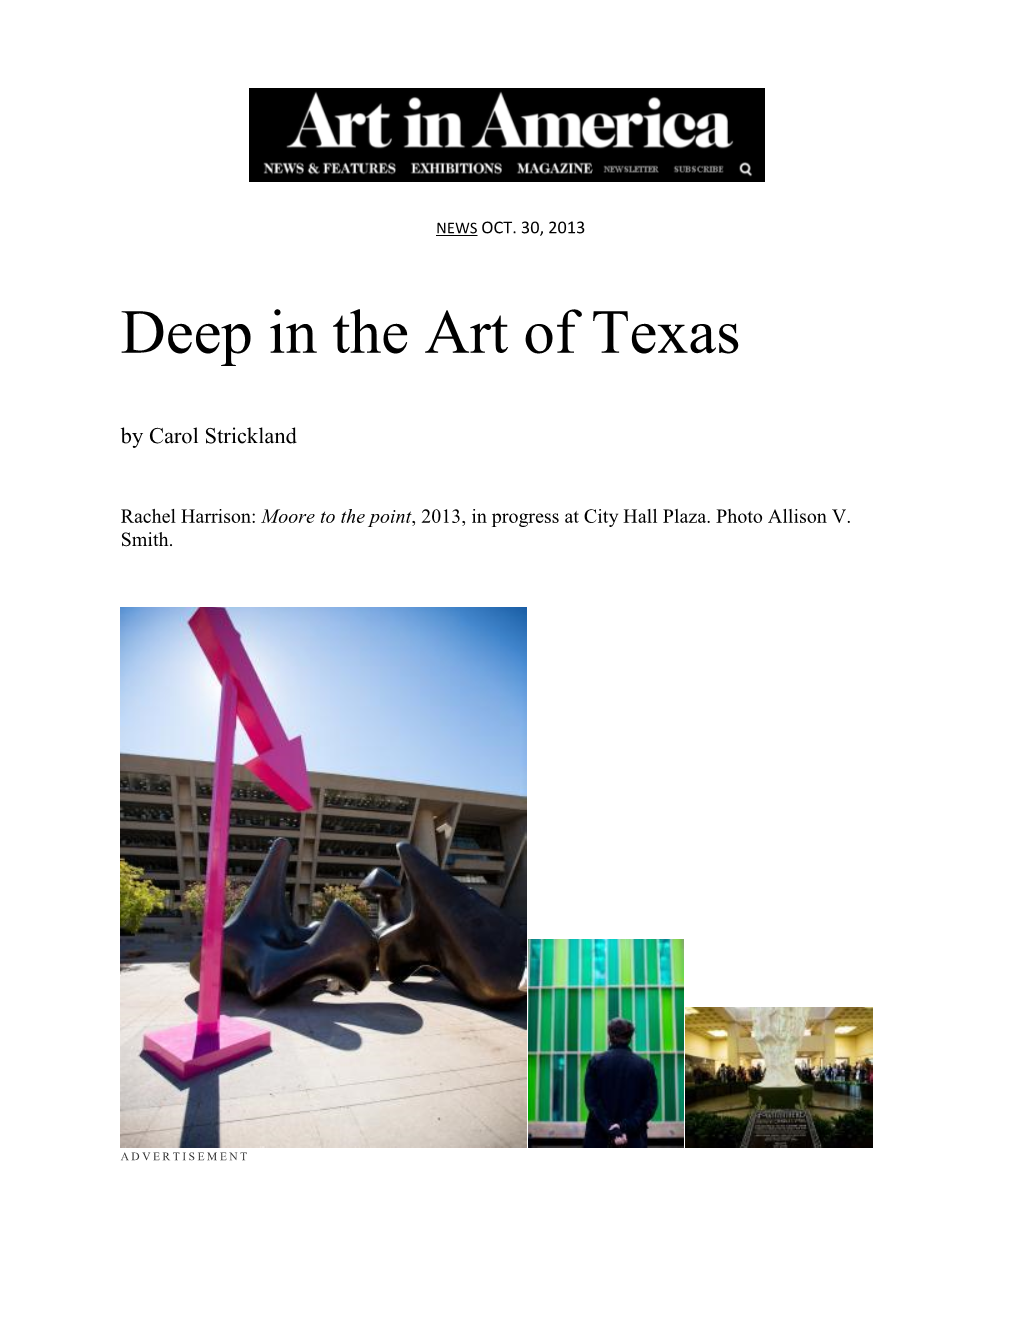 Deep in the Art of Texas by Carol Strickland